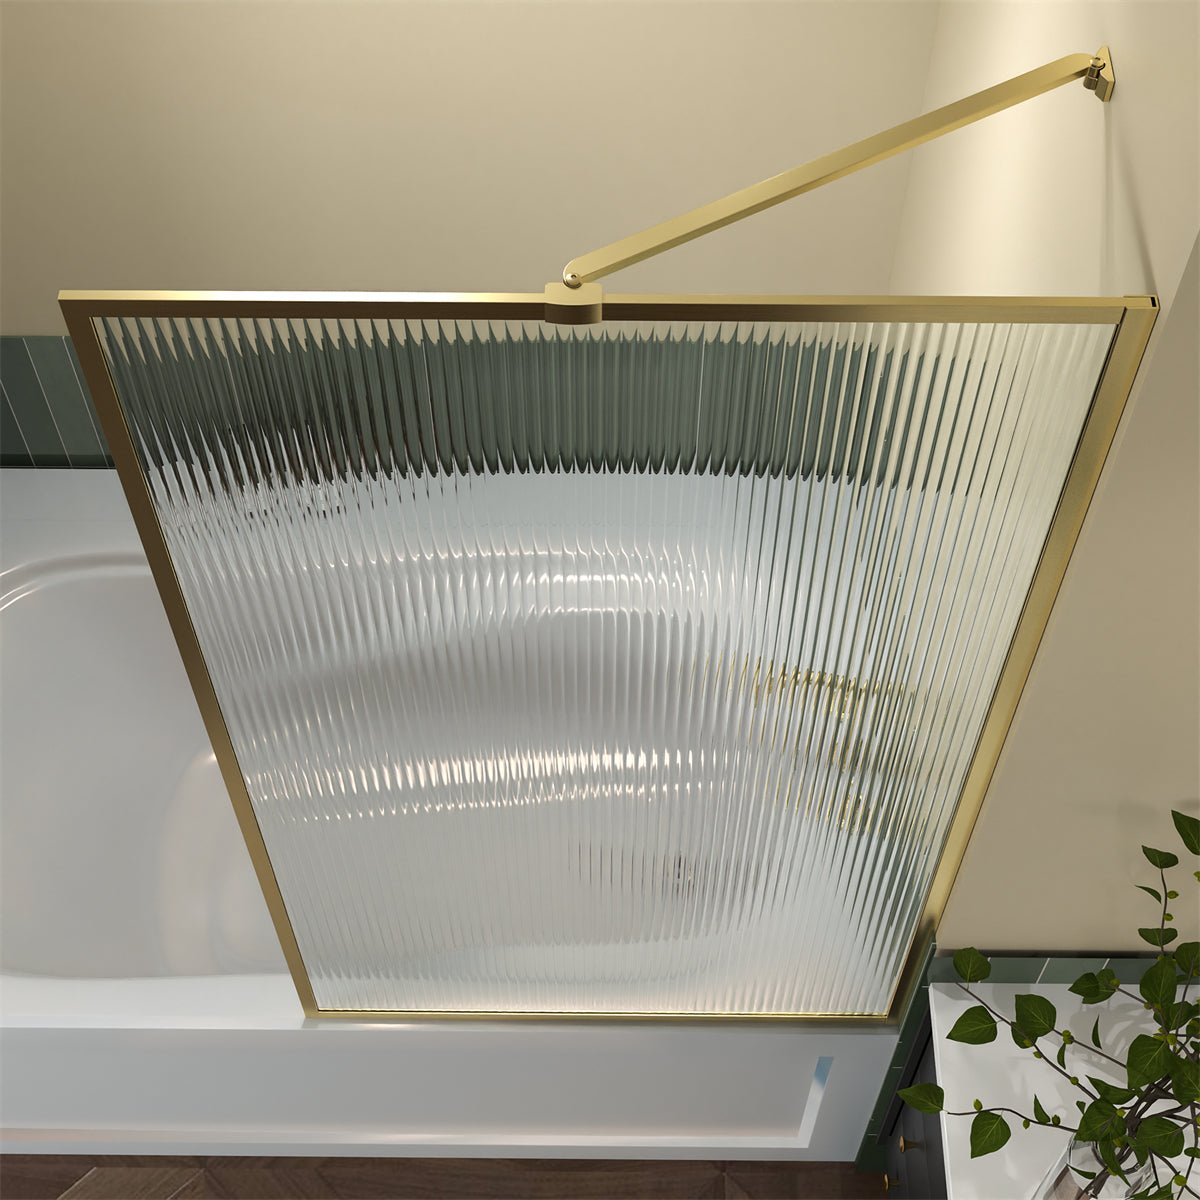 Serenity 33" x 58" Bathtub Screen Reeded Glass Shower Panel For Bathtub,Brushed Gold Finish,Reversible Installation,Square